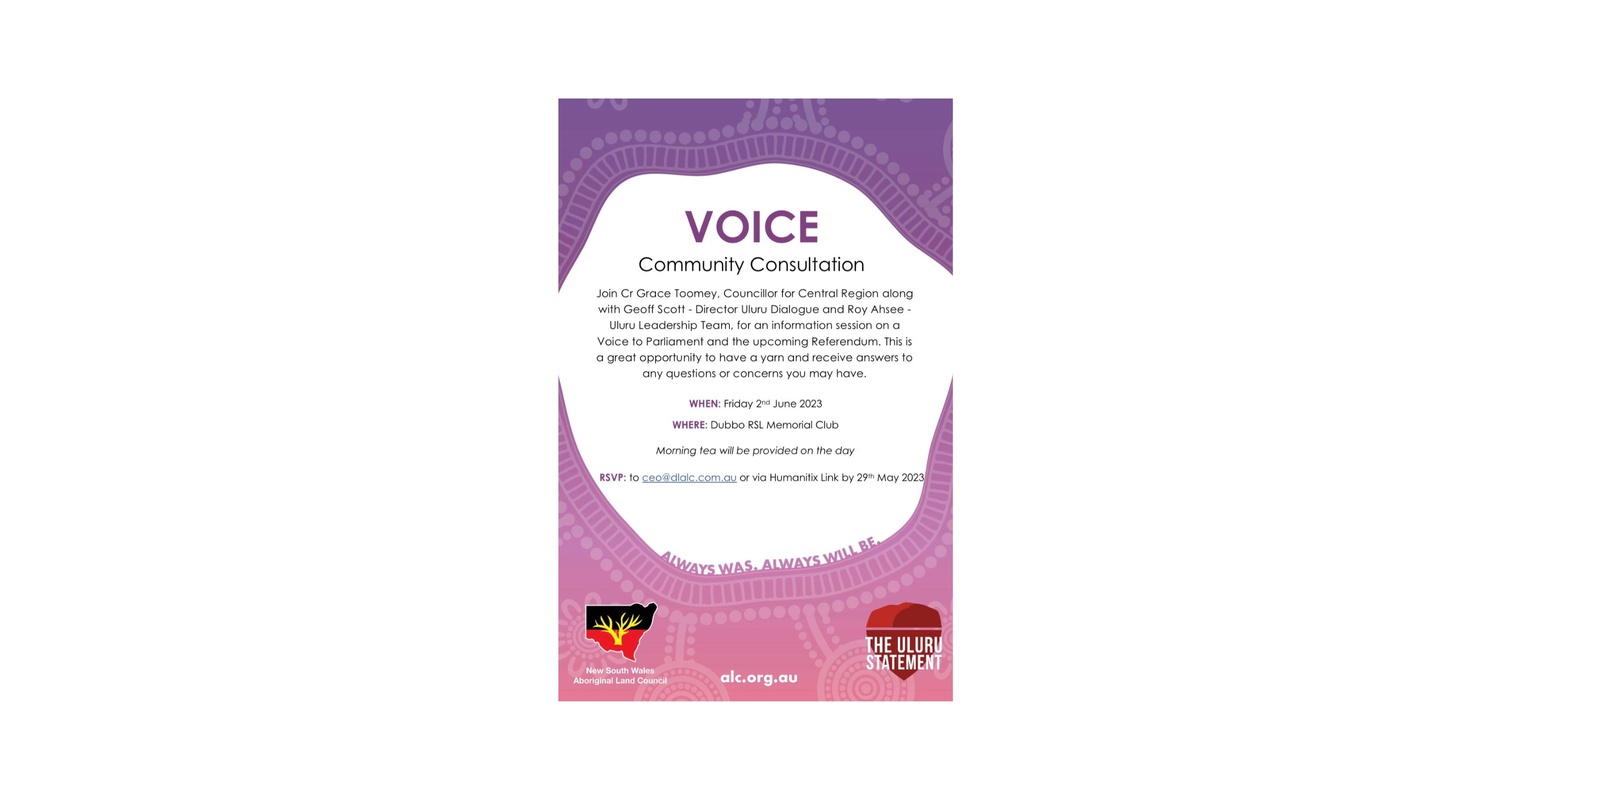 Banner image for The VOICE Community Consultation